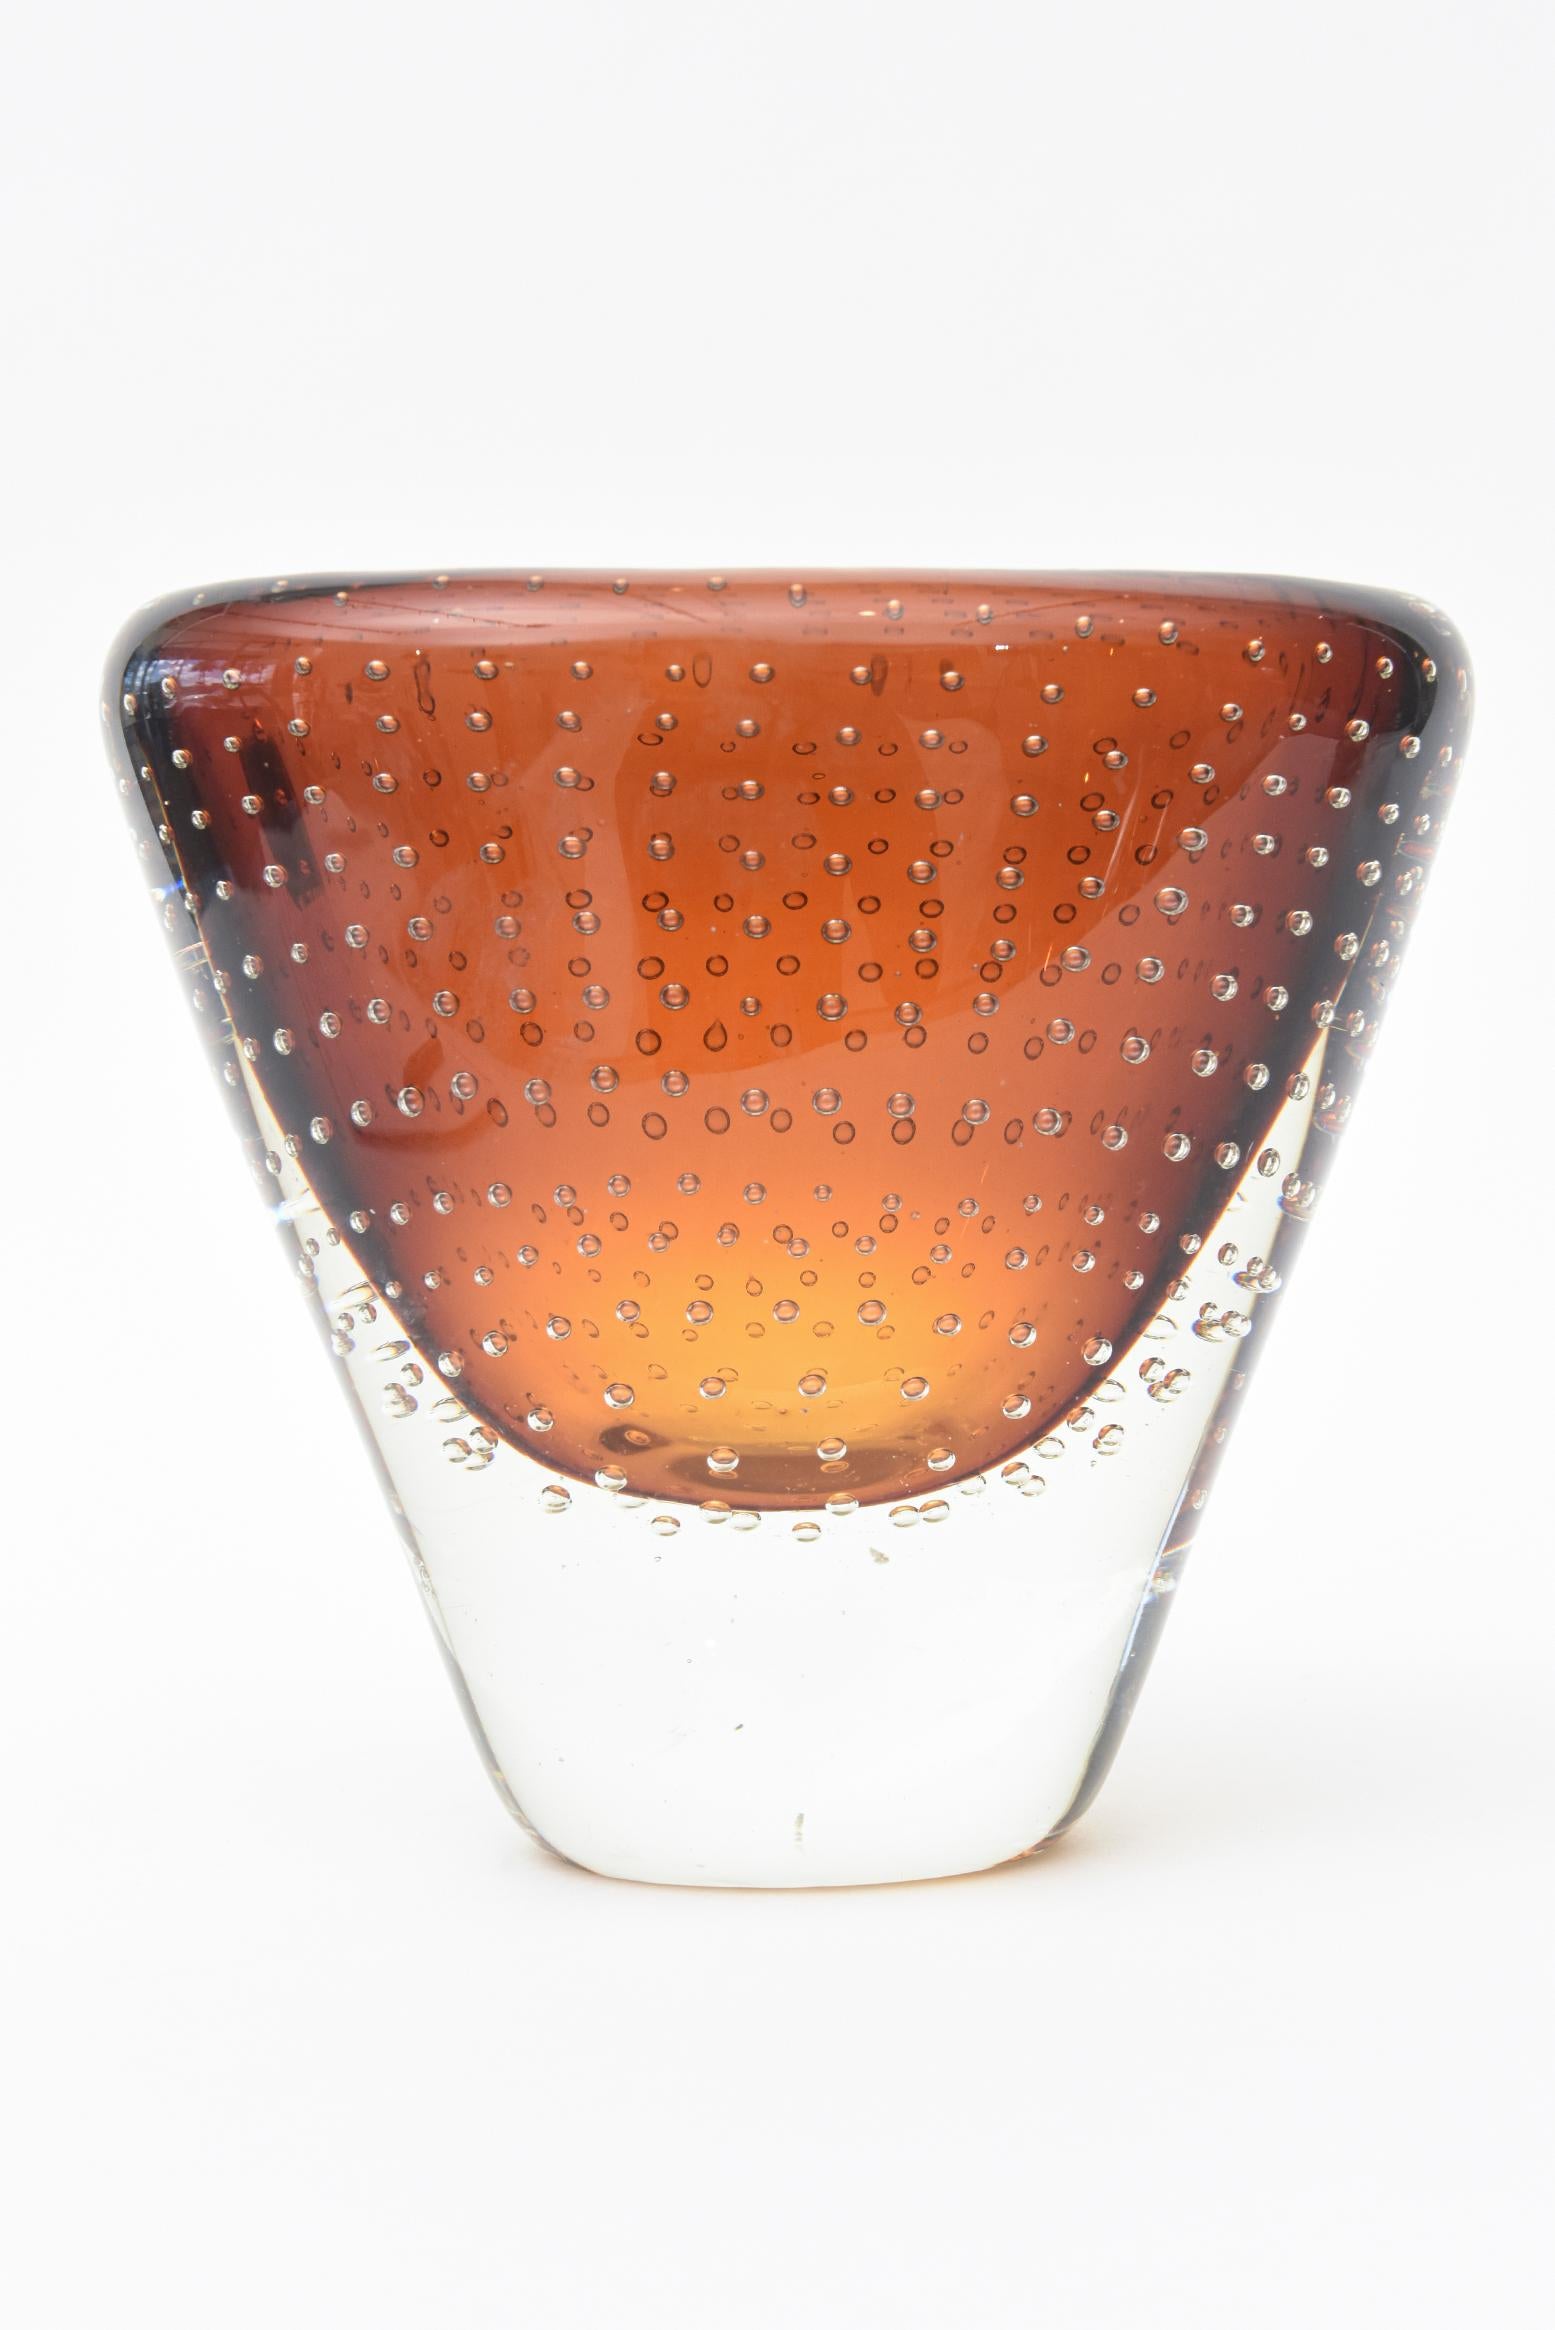 This lovely thick walled Swedish Sommerso glass vase has abundance of controlled bubbles floating called Bullecante. It is from the 1970s. The amber cognac color is rich looking and will transition from contemporary, to midcentury to transitional